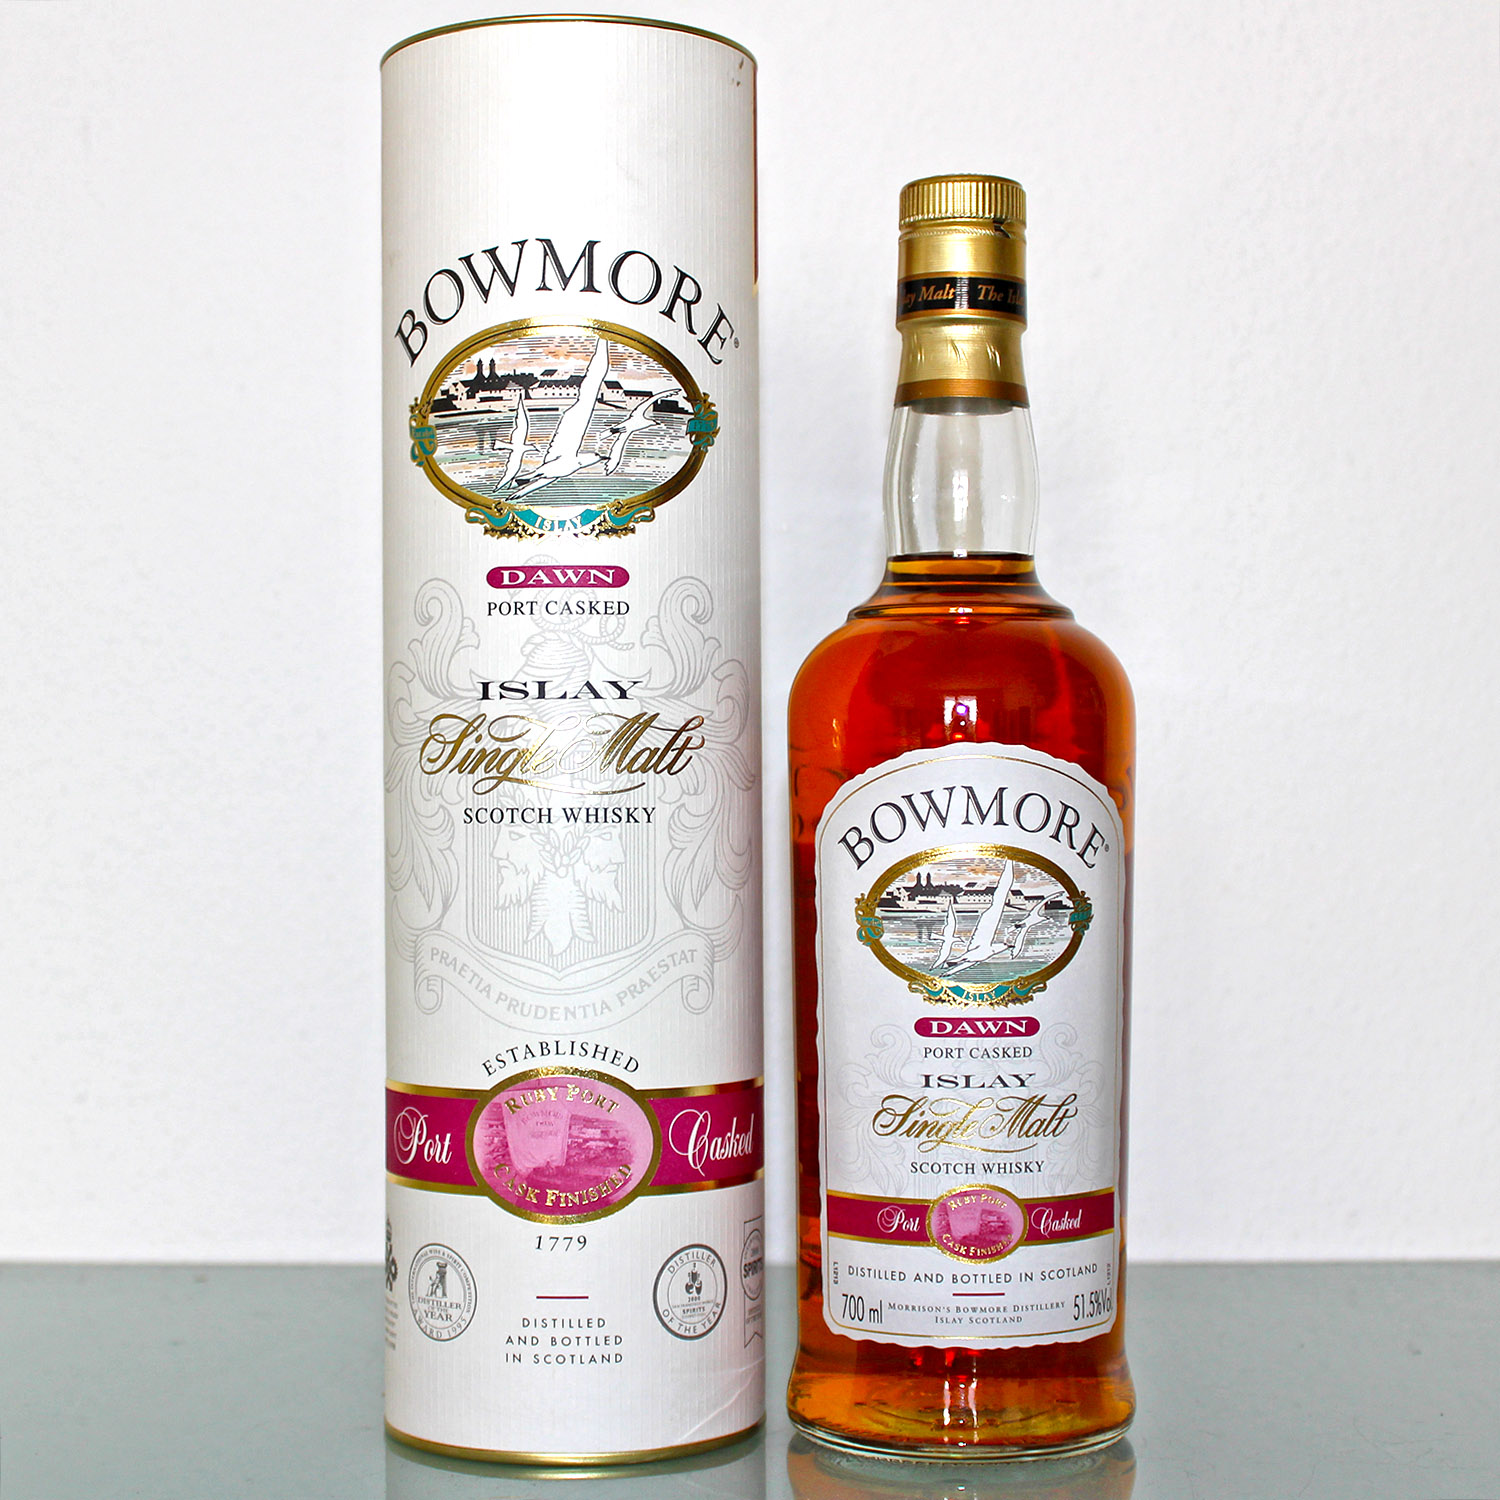 Bowmore Dawn Ruby Port Cask Finished Scotch Whisky